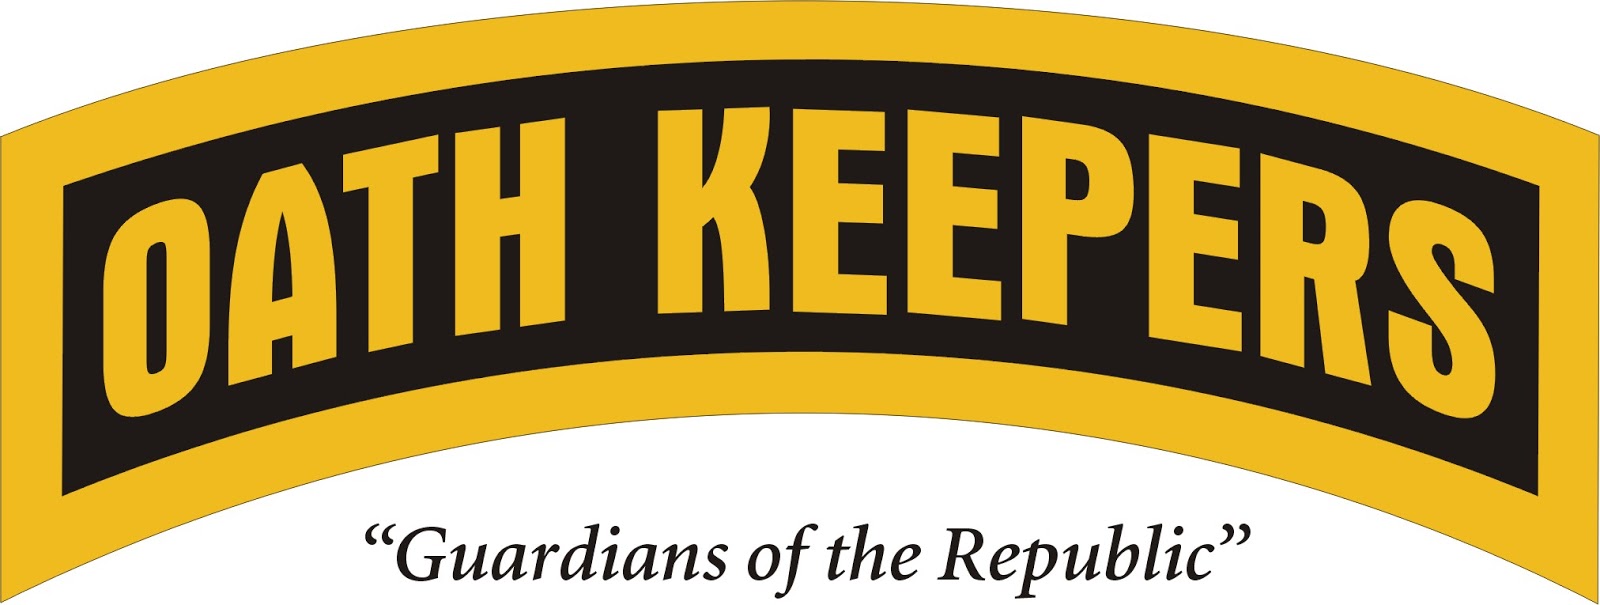 1600x605 > Oath Keepers Wallpapers